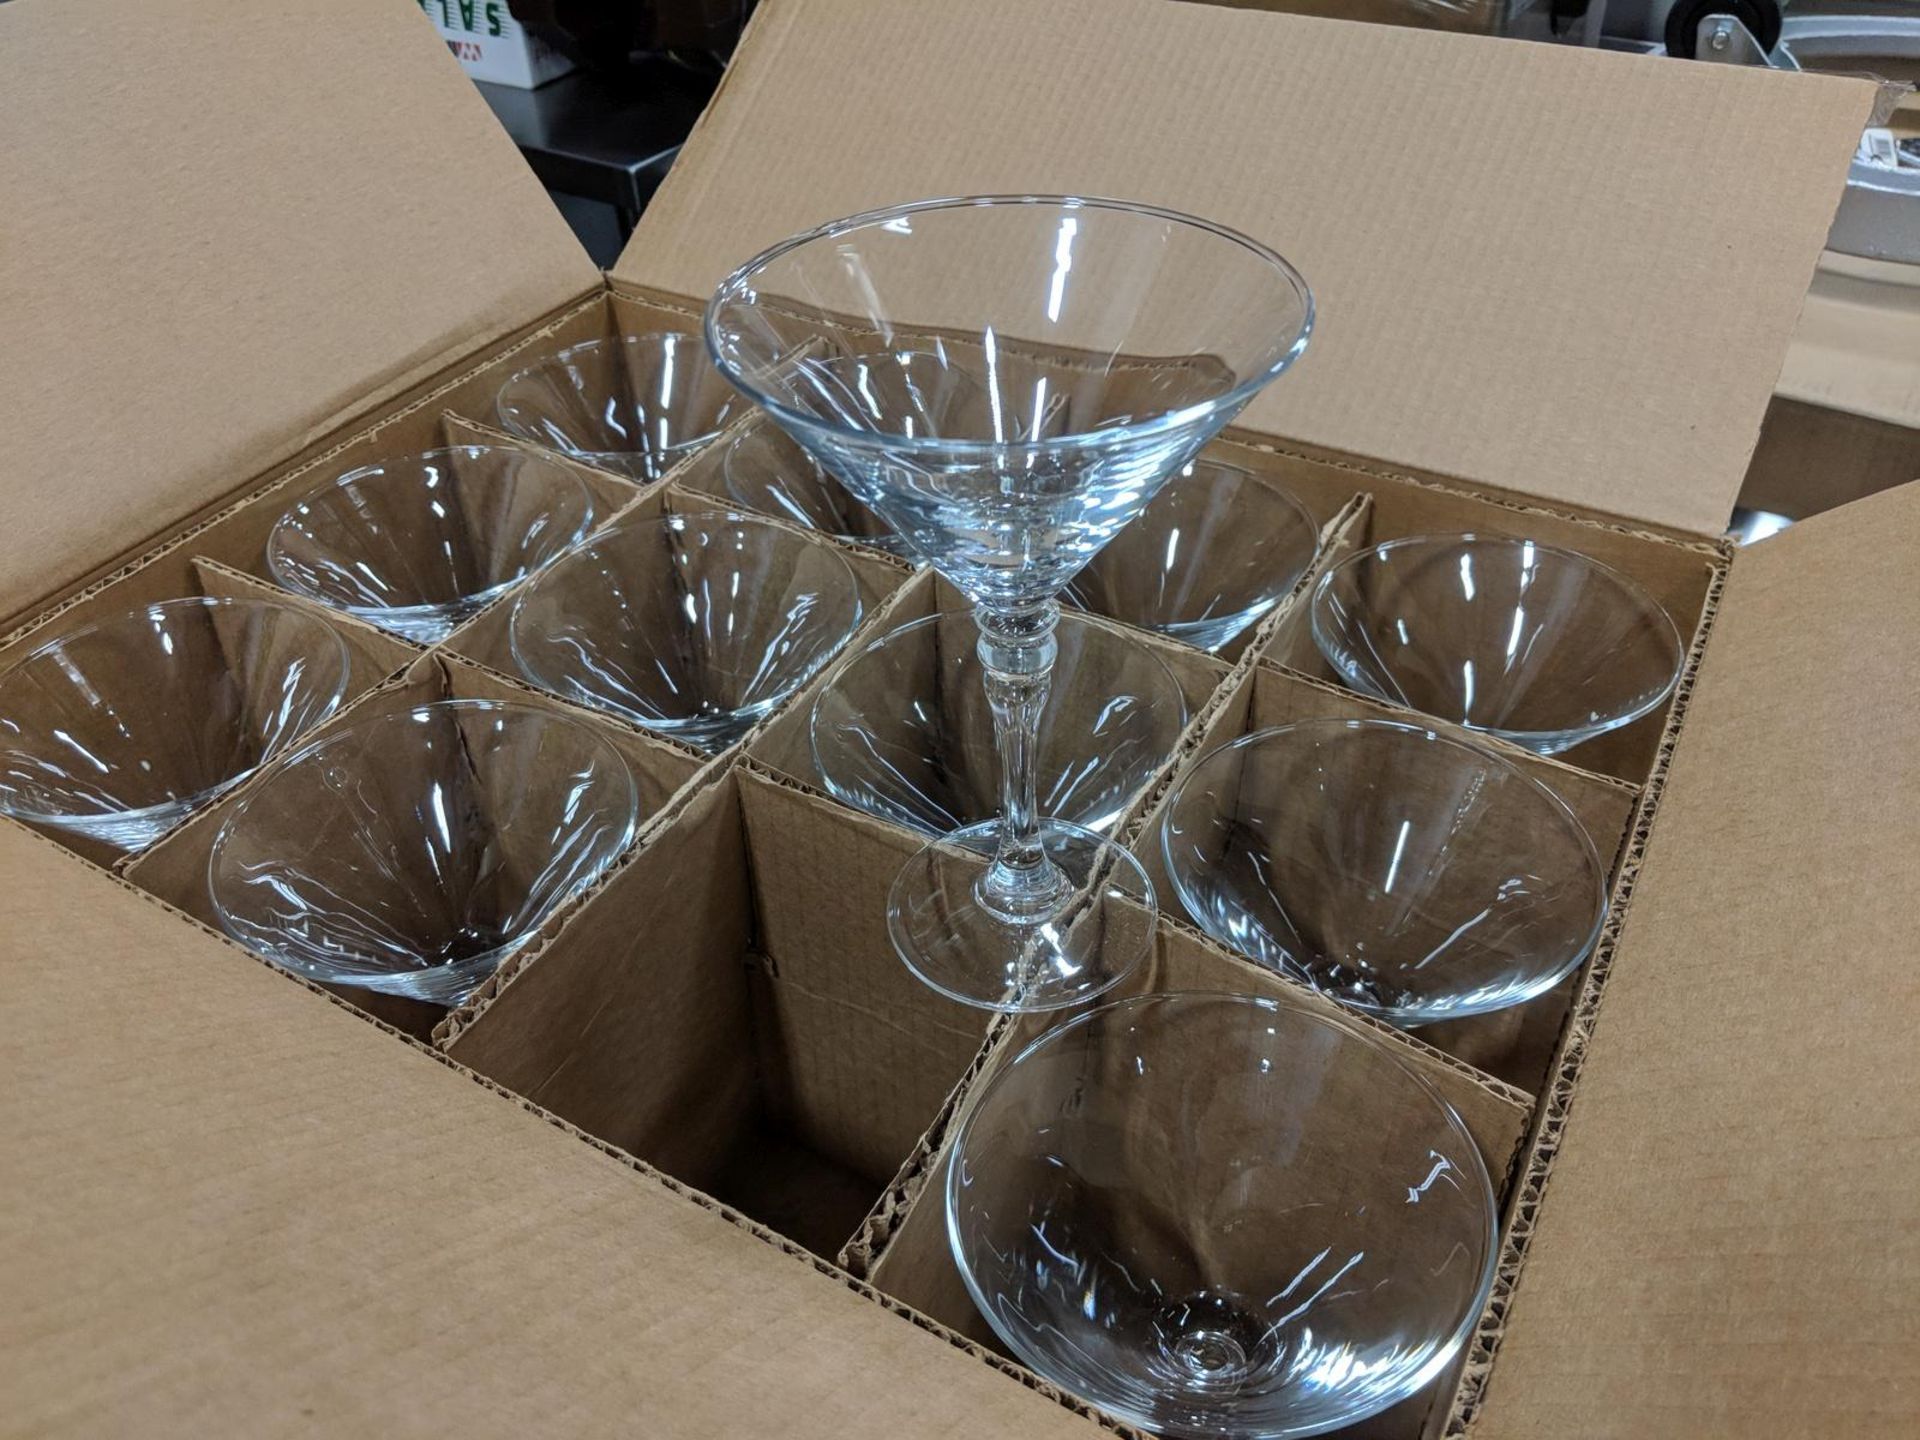 7.5oz/220ml Sienna Cocktail Glasses - Lot of 12 (1 Case), Arcoroc 54850 - Image 3 of 3